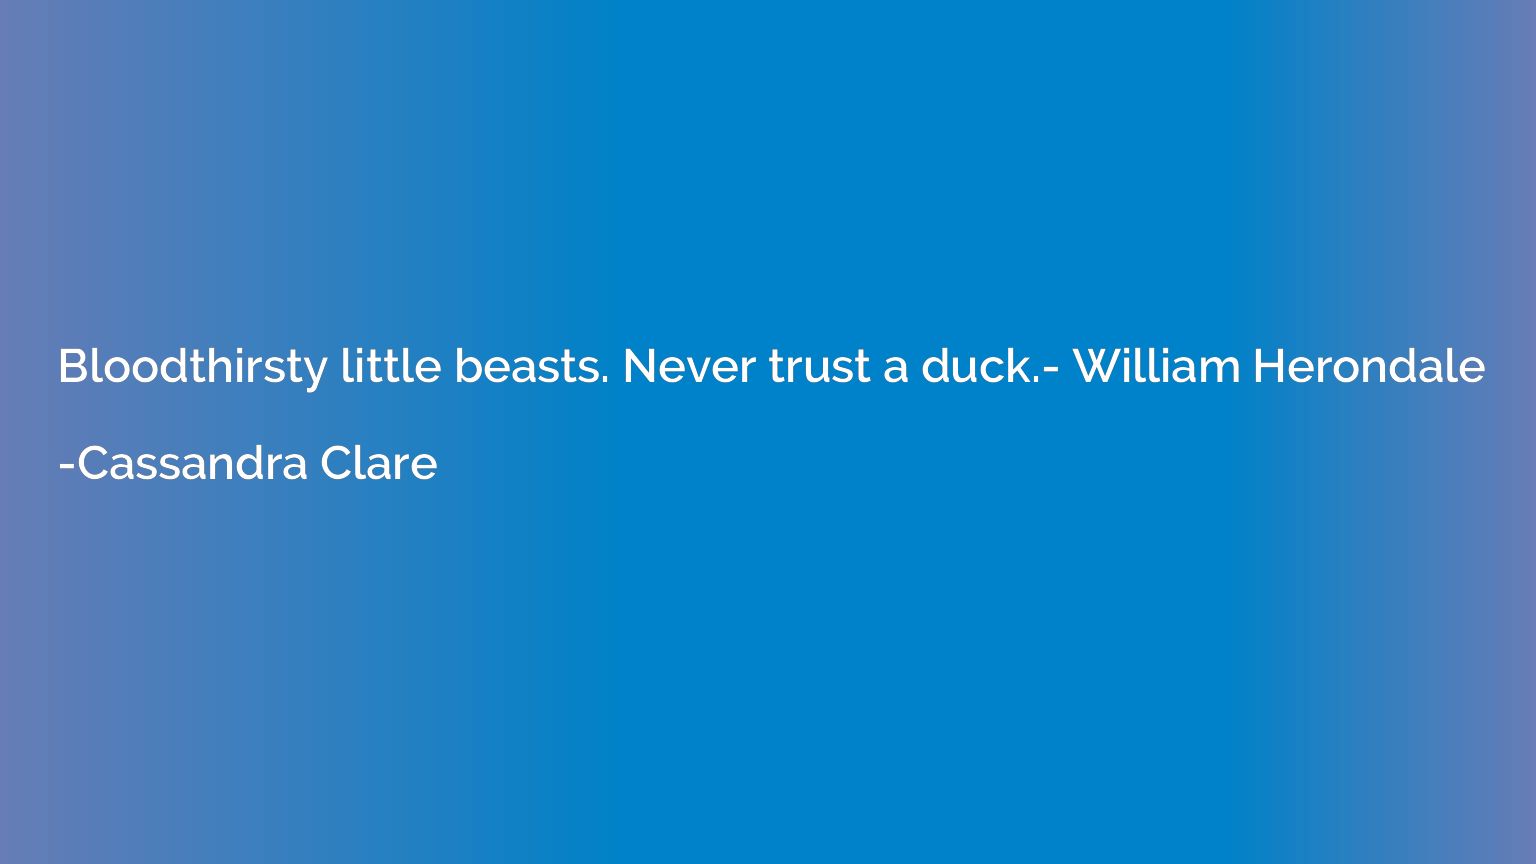 Bloodthirsty little beasts. Never trust a duck.- William Her